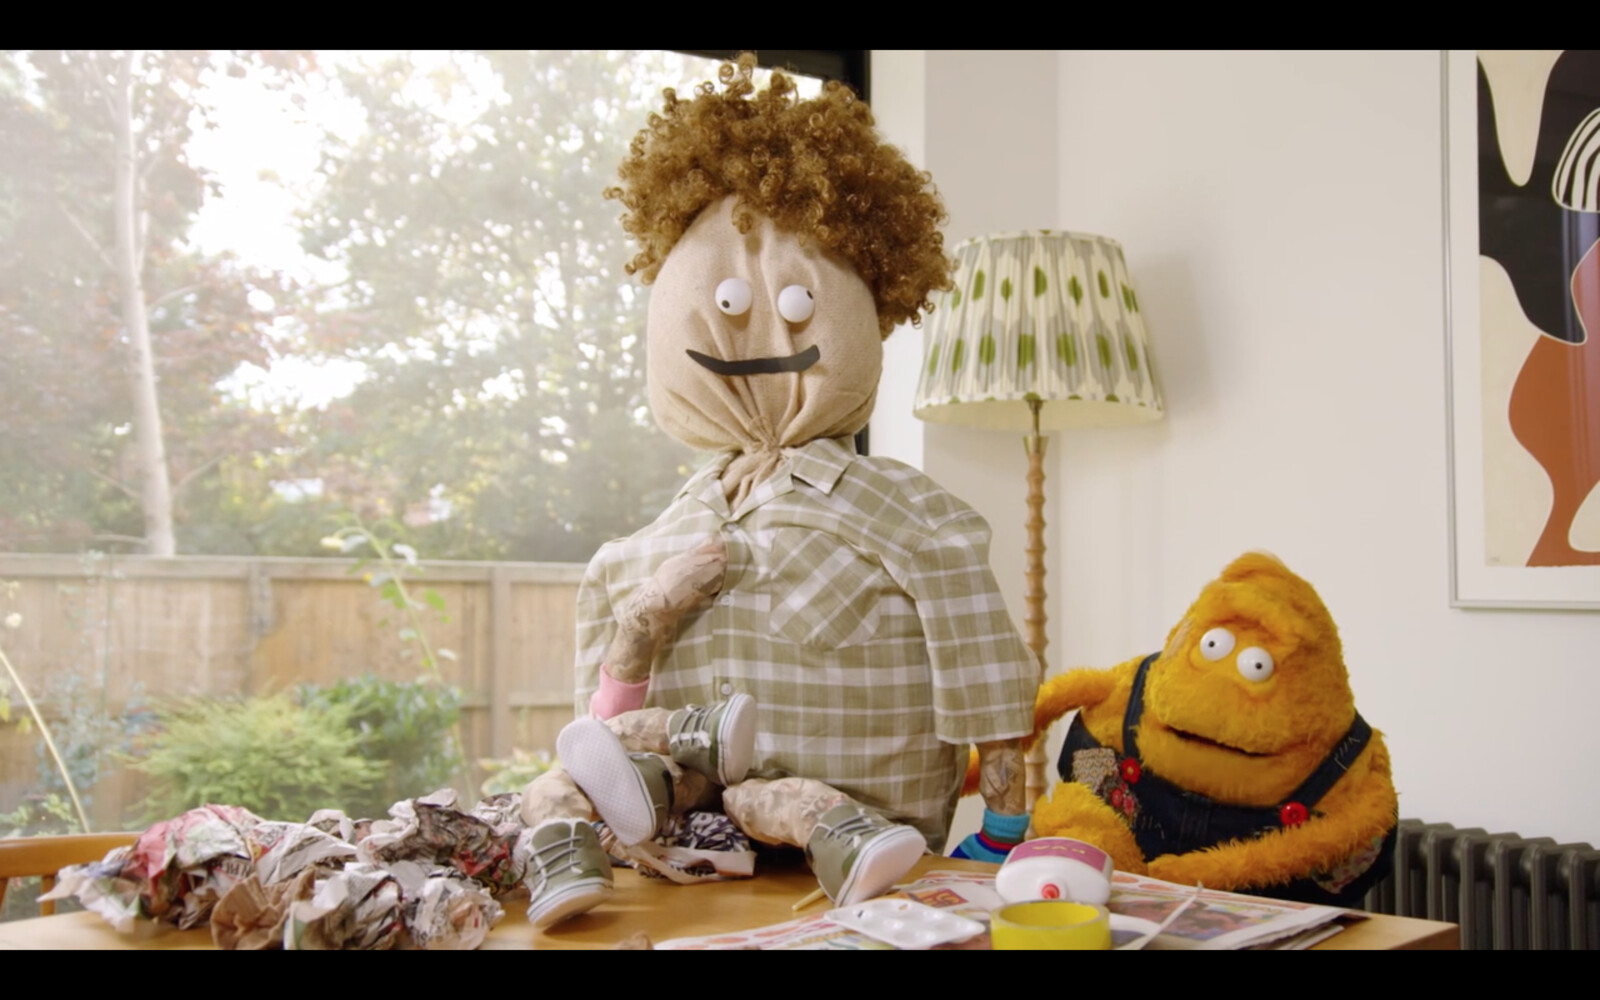 Saturday Mash-Up Live! CBBC
‘Guy Fawkes Scarecrow’ as if made by puppet Stanley.